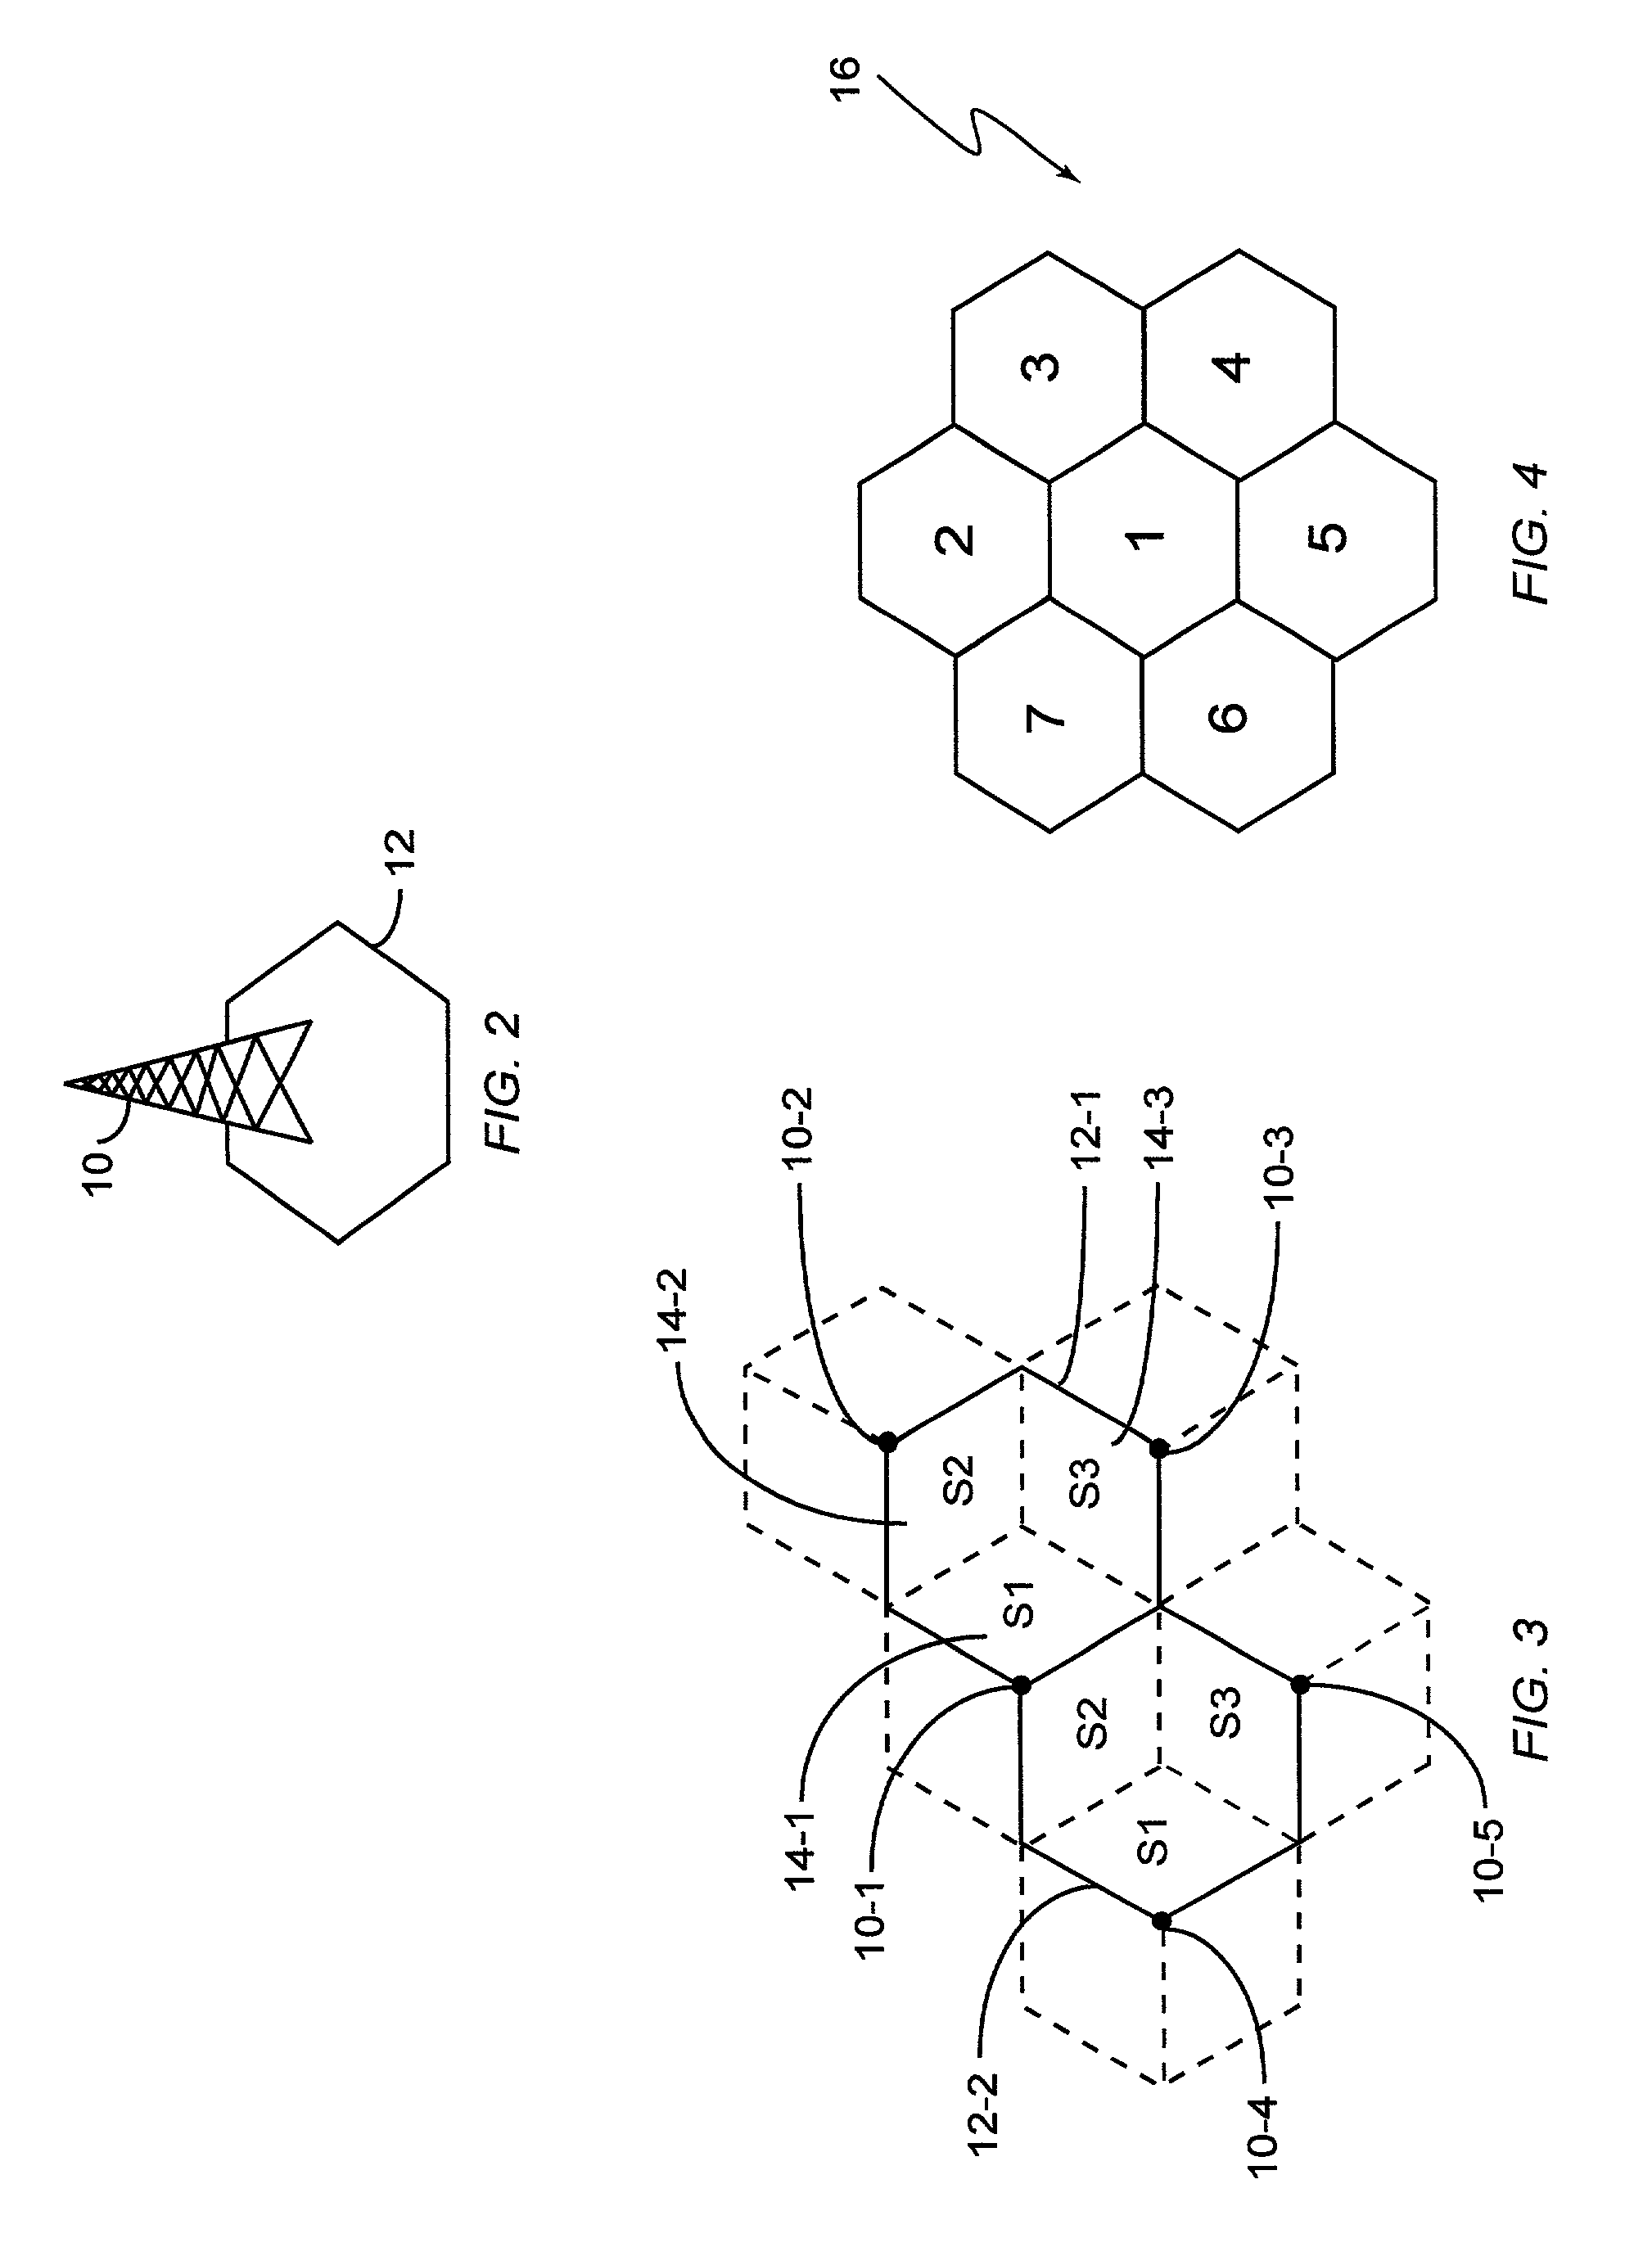 Efficient radio reception method for automatic frequency planning